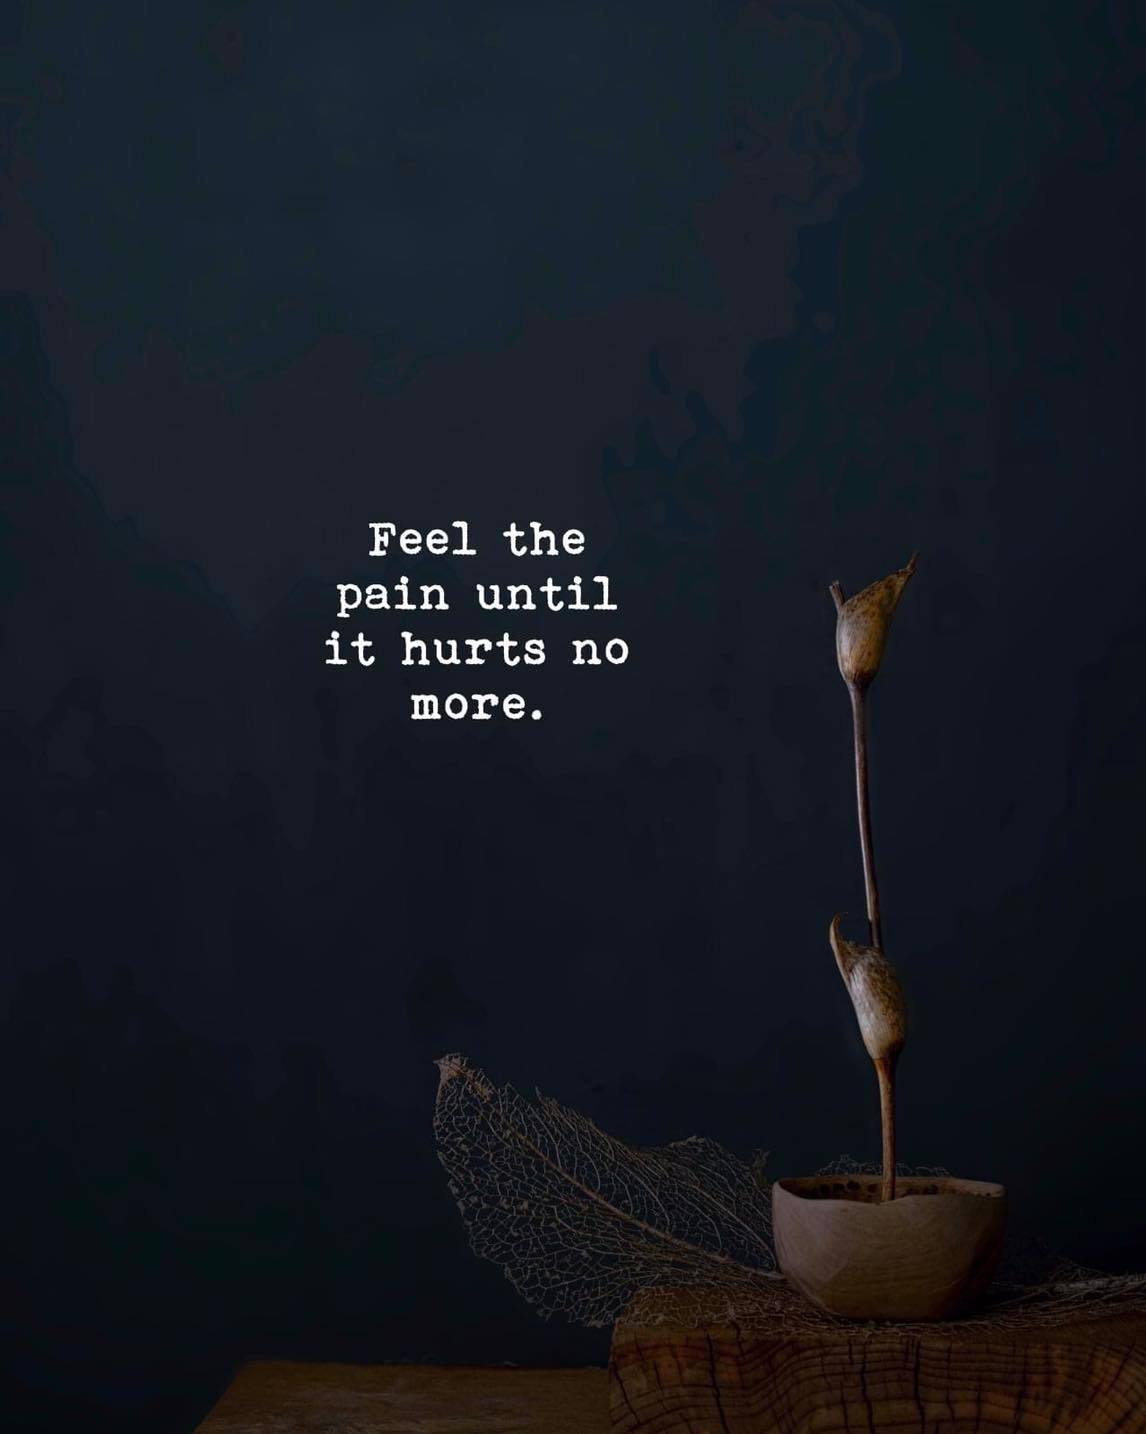 Quotes 'nd Notes - Feel the pain until it hurts no more.